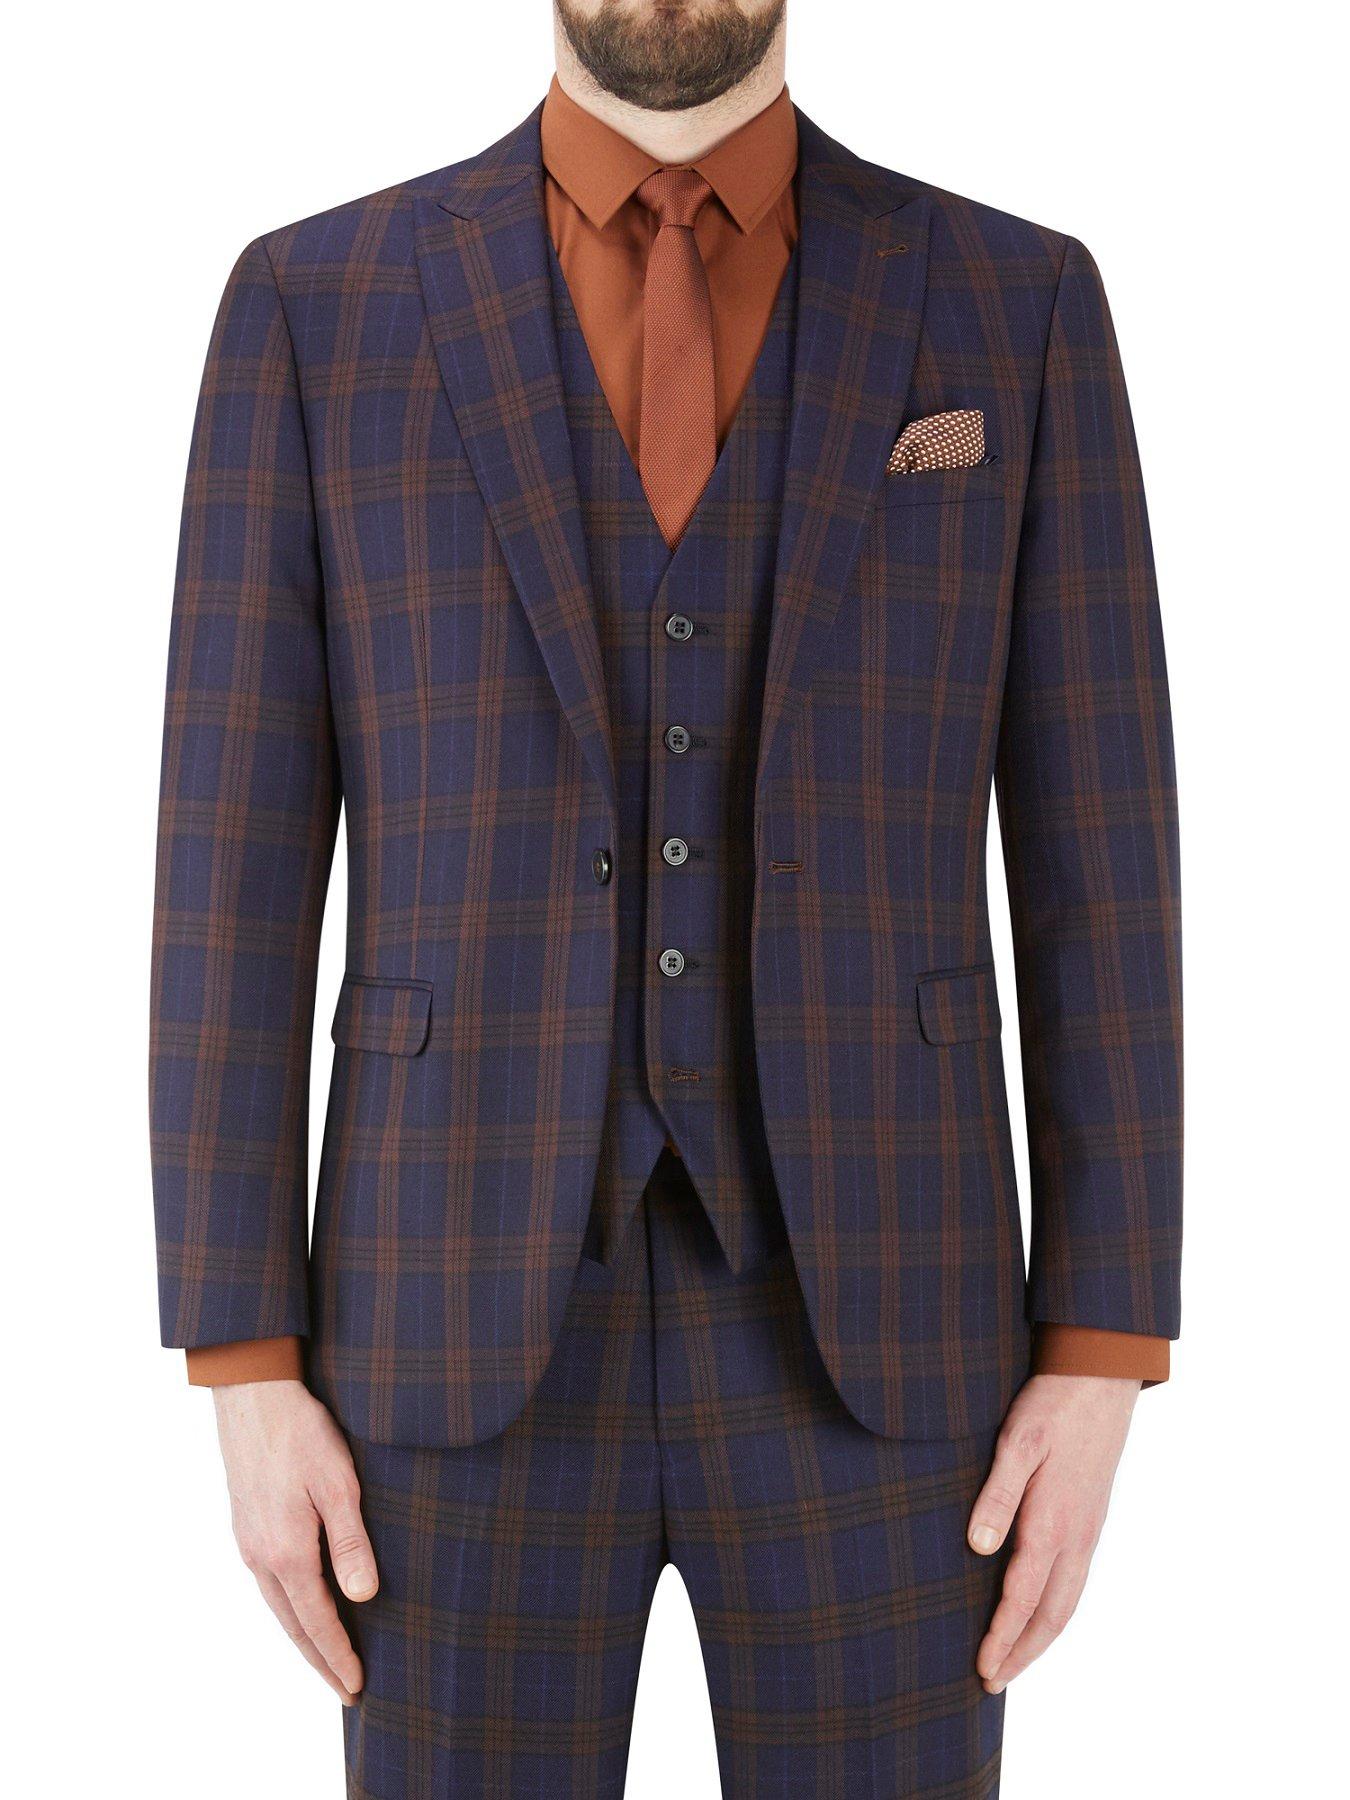  Ramsay Tailored Fit Bold Check Jacket - Navy/Rust